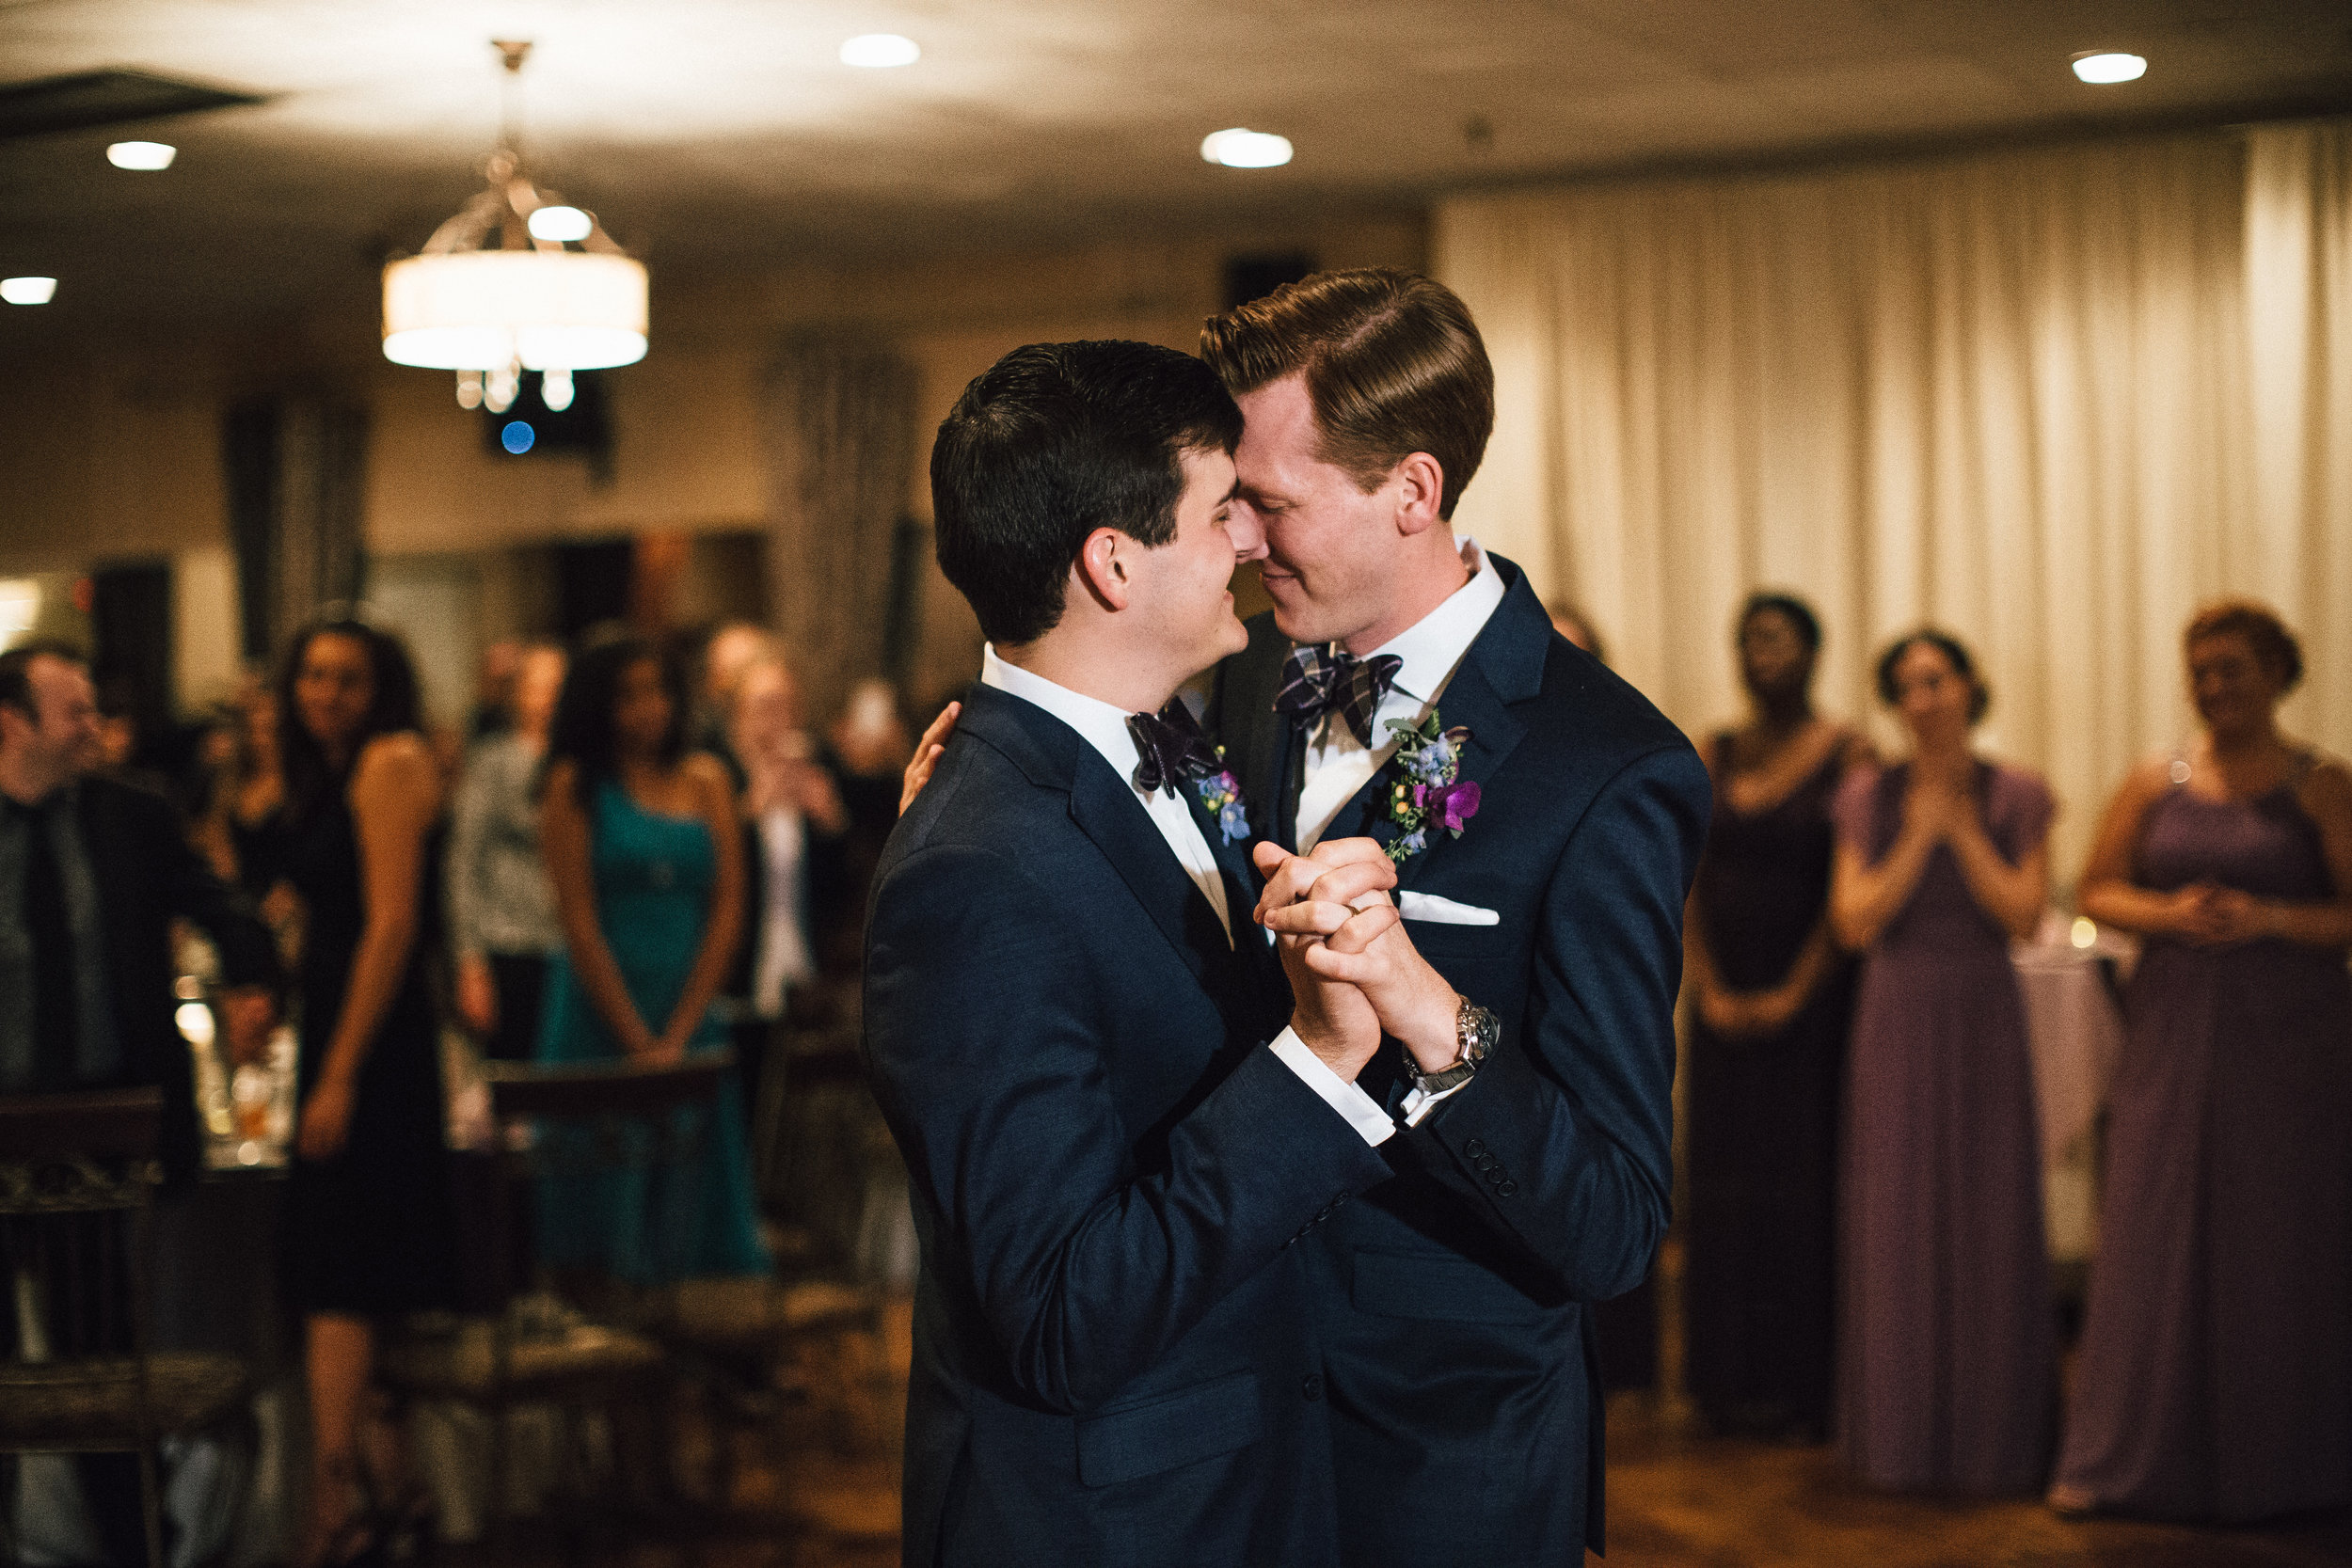 Sean &amp; Jeremy's first dance as husbands. Not a dry eye in the room.